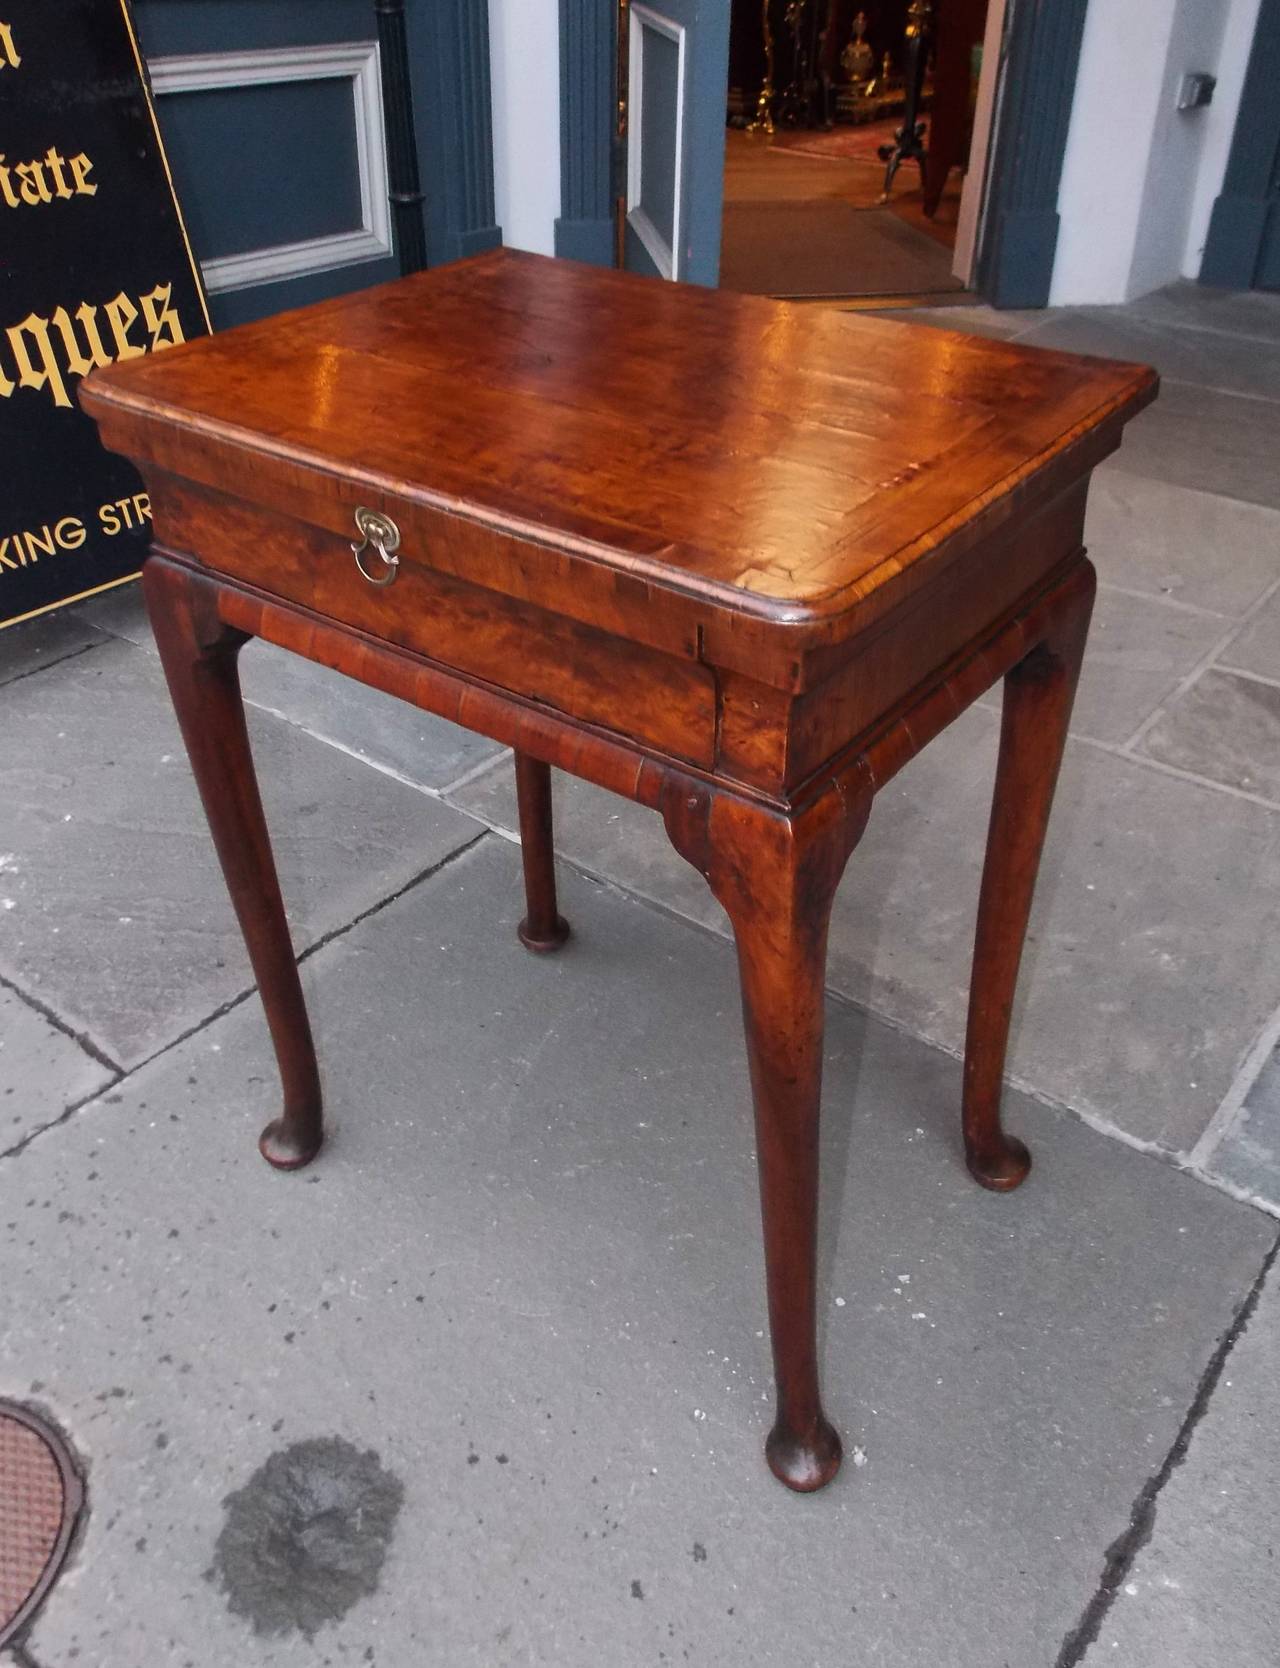 English Queen Anne walnut one-drawer side table with cross banded top, inlaid feather banding, original brass pull, and terminating on rounded tapered legs with pad feet, Early 18th century. Table is finished on all sides.